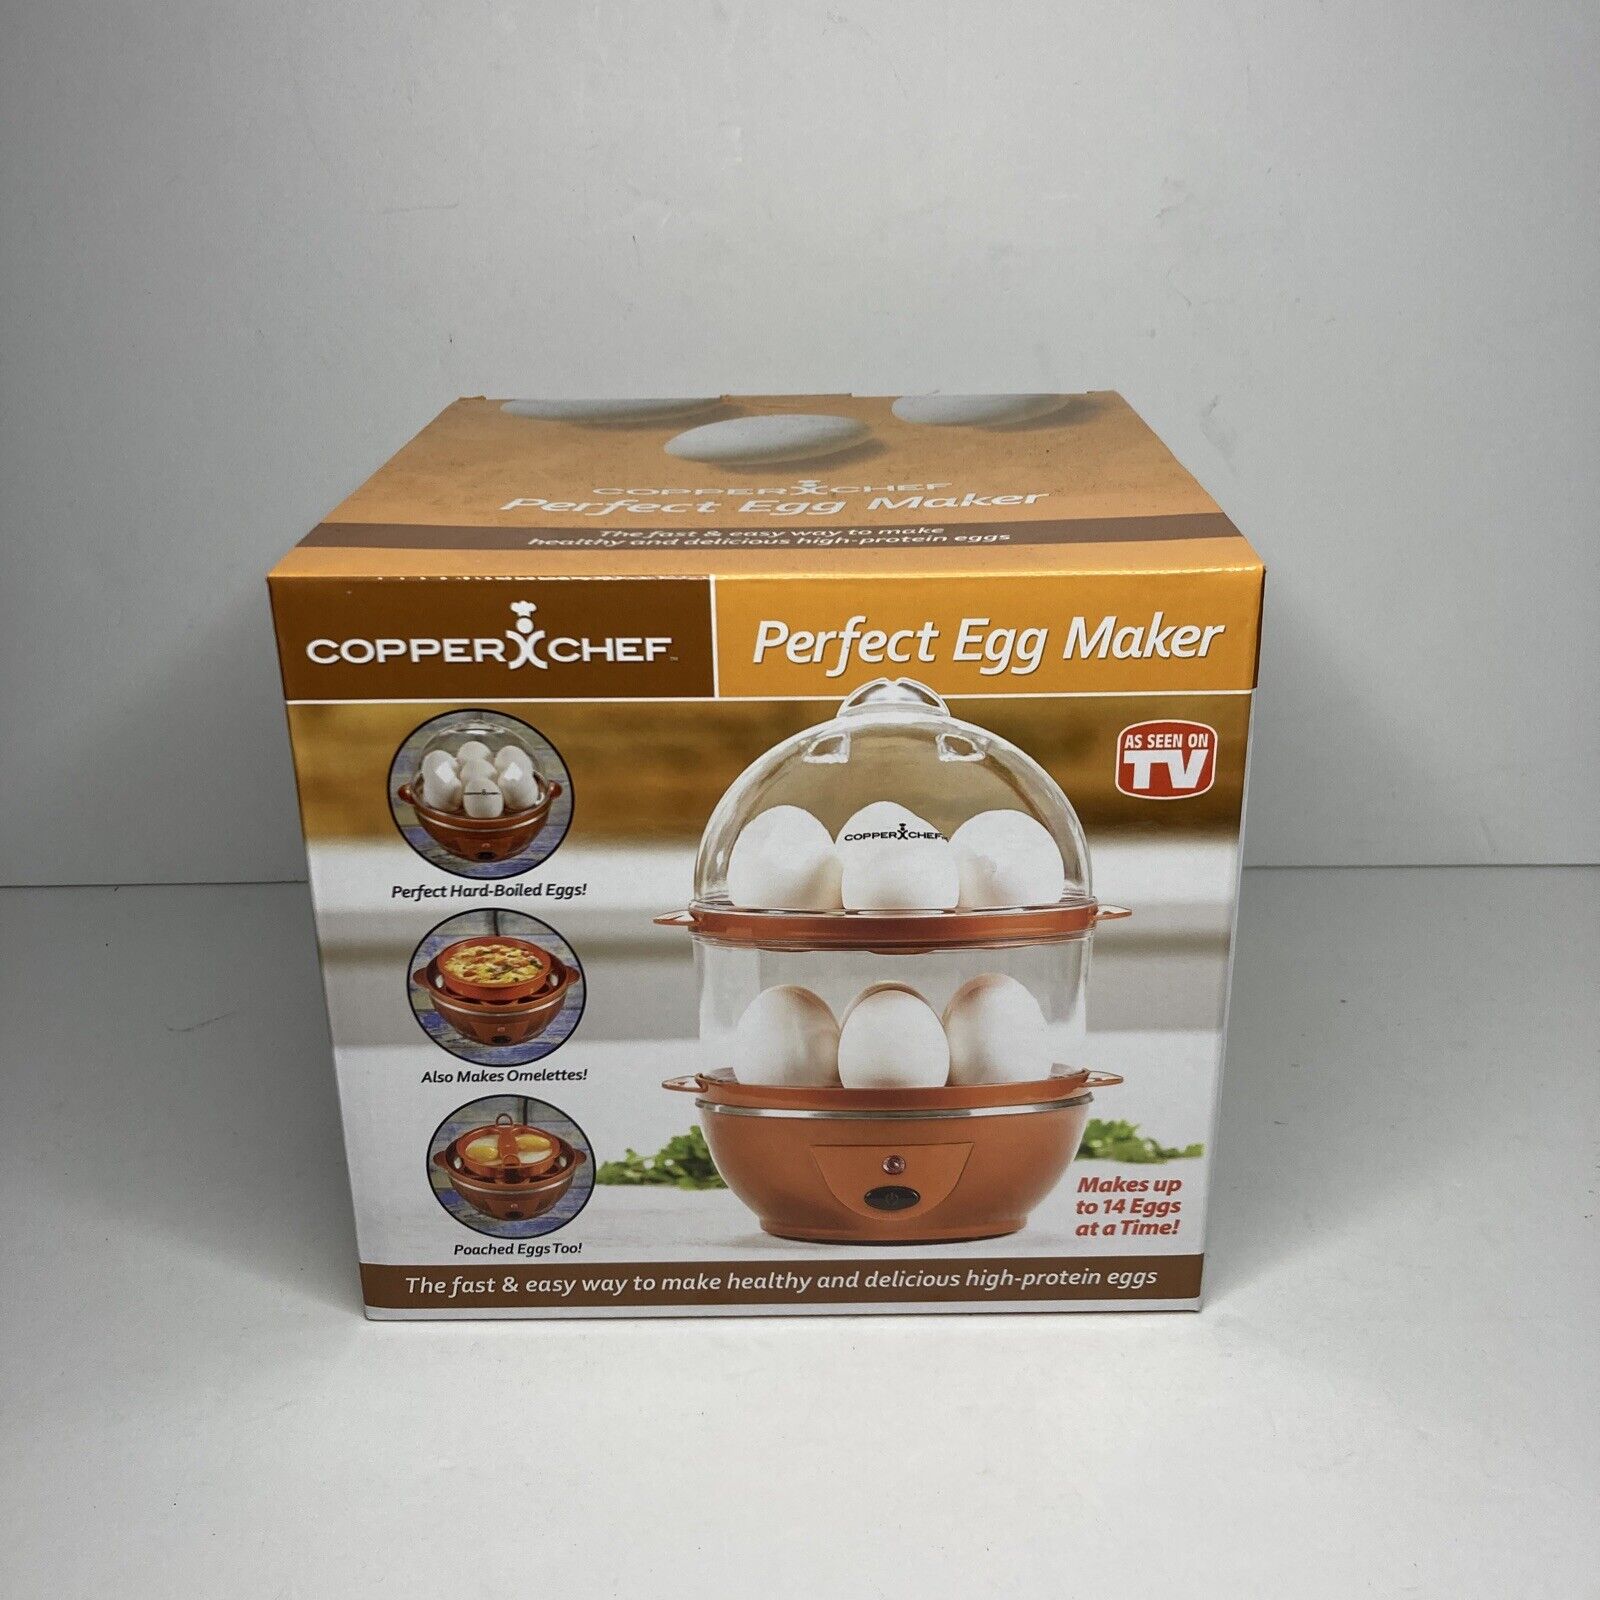 Copper Chef Perfect Limited time cheap sale Egg Maker Up New 14 Box eggs to 25% OFF in